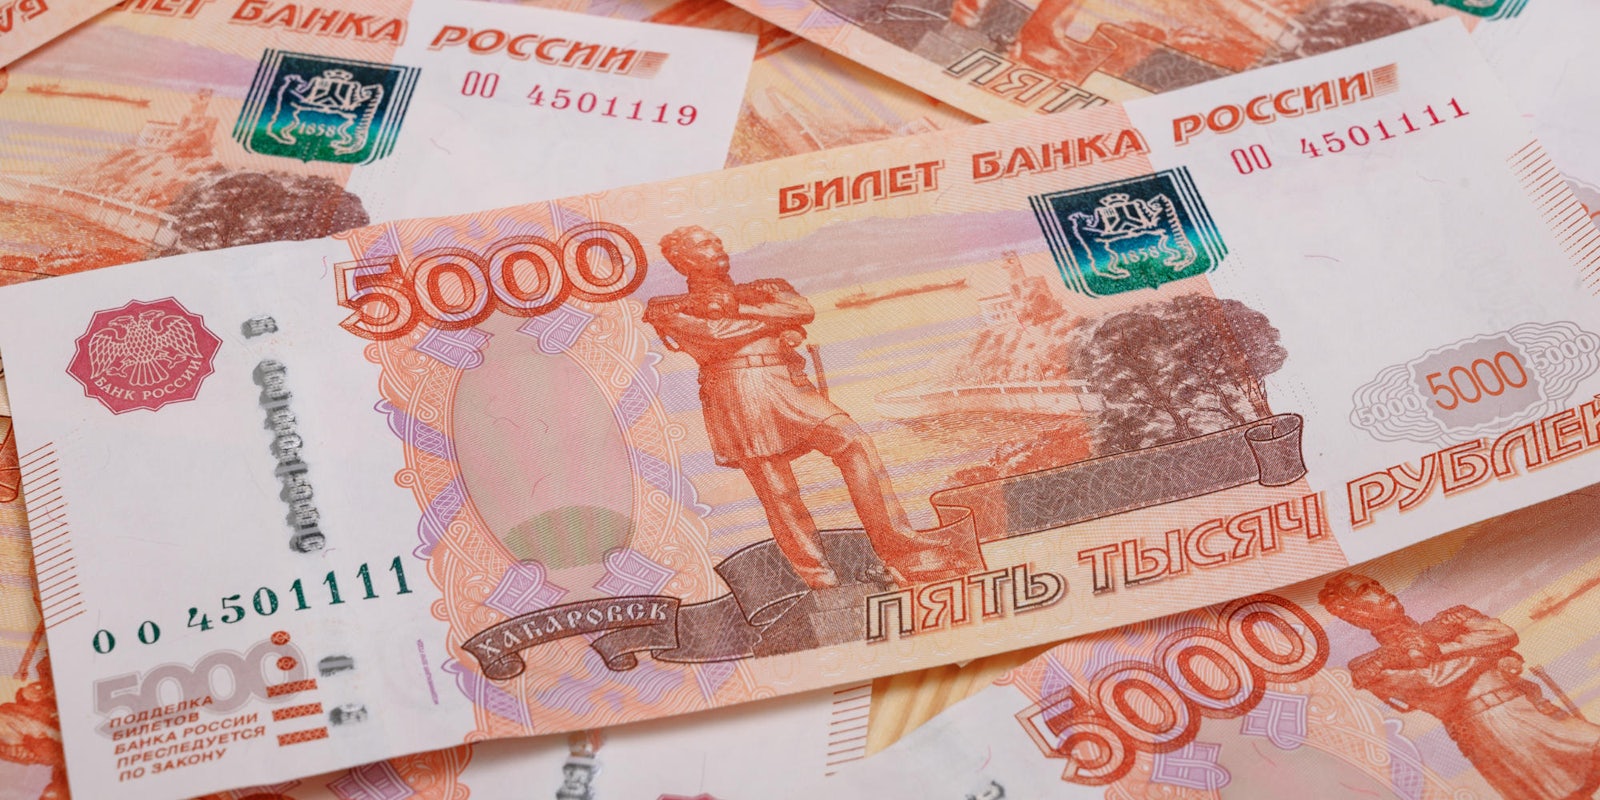 photo of a russian 5,000 ruble banknote